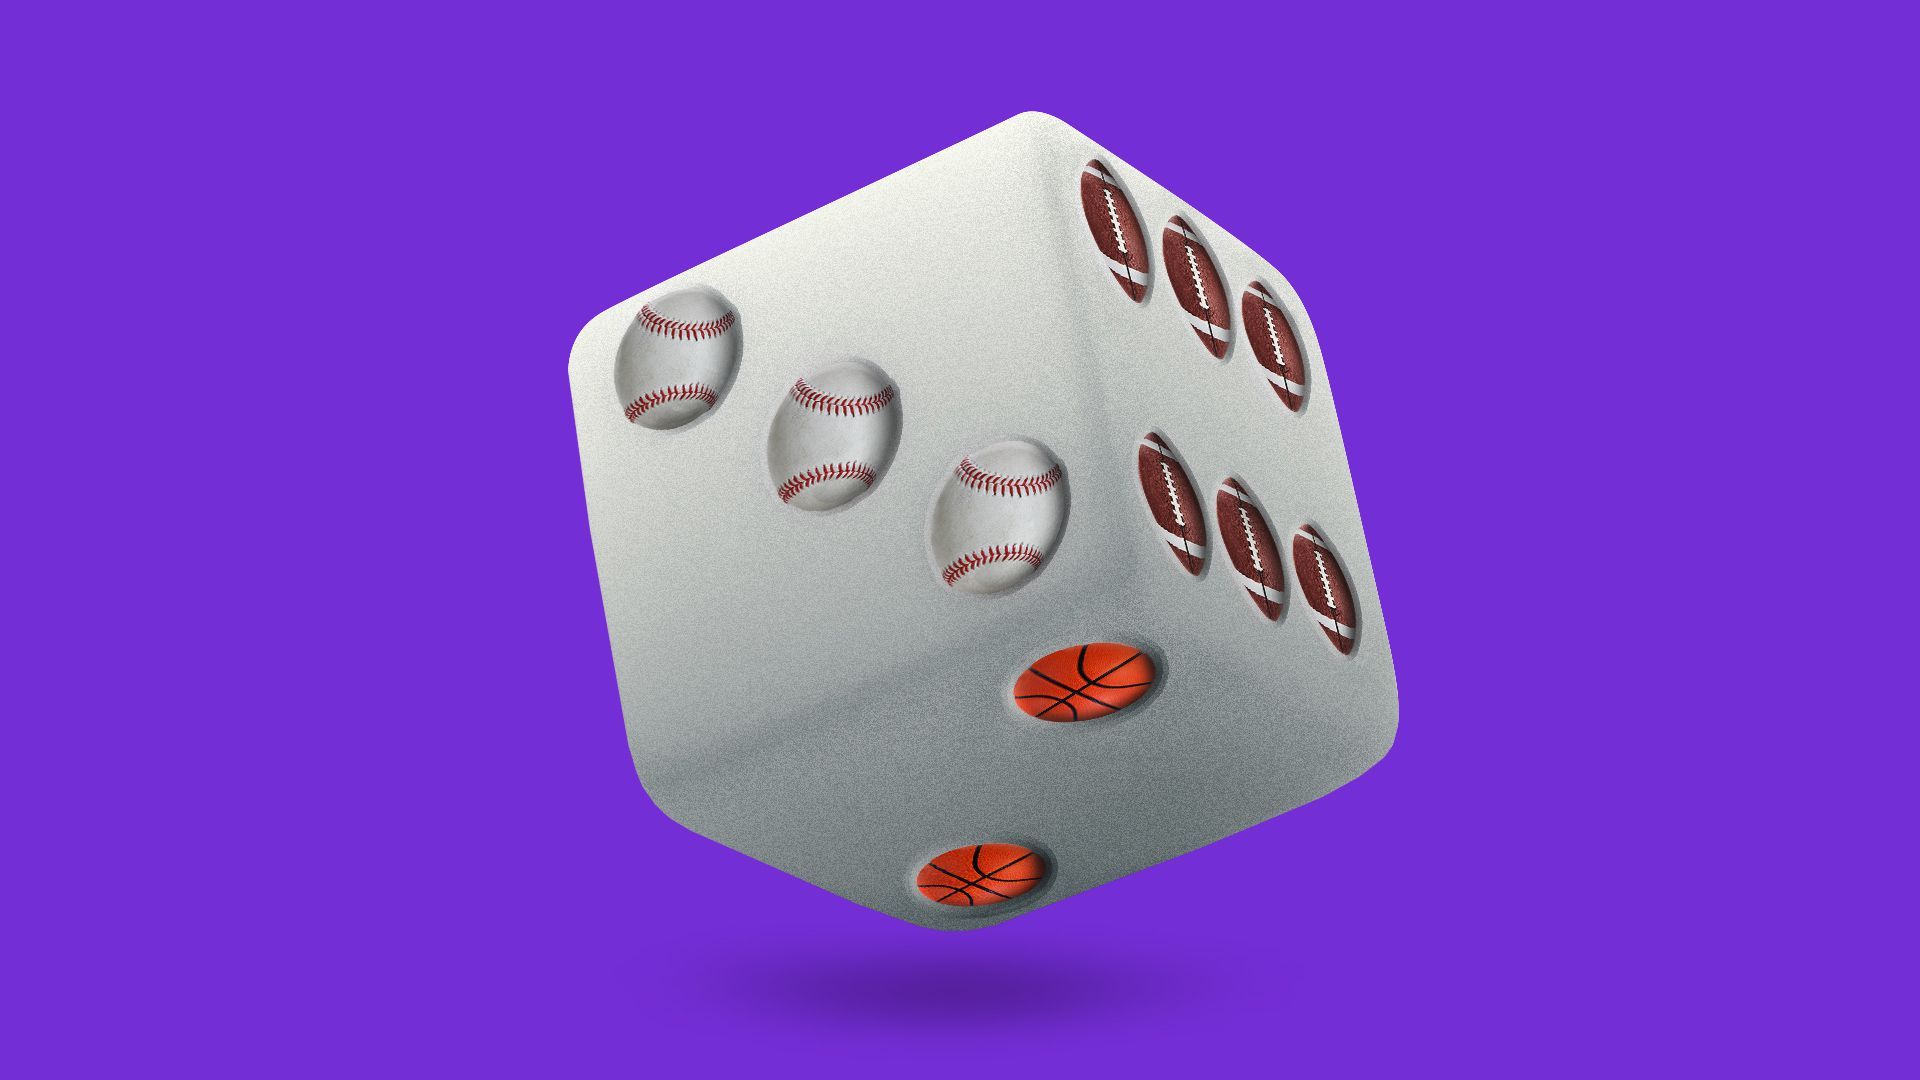 Illustration of a die with different sports balls as the dots